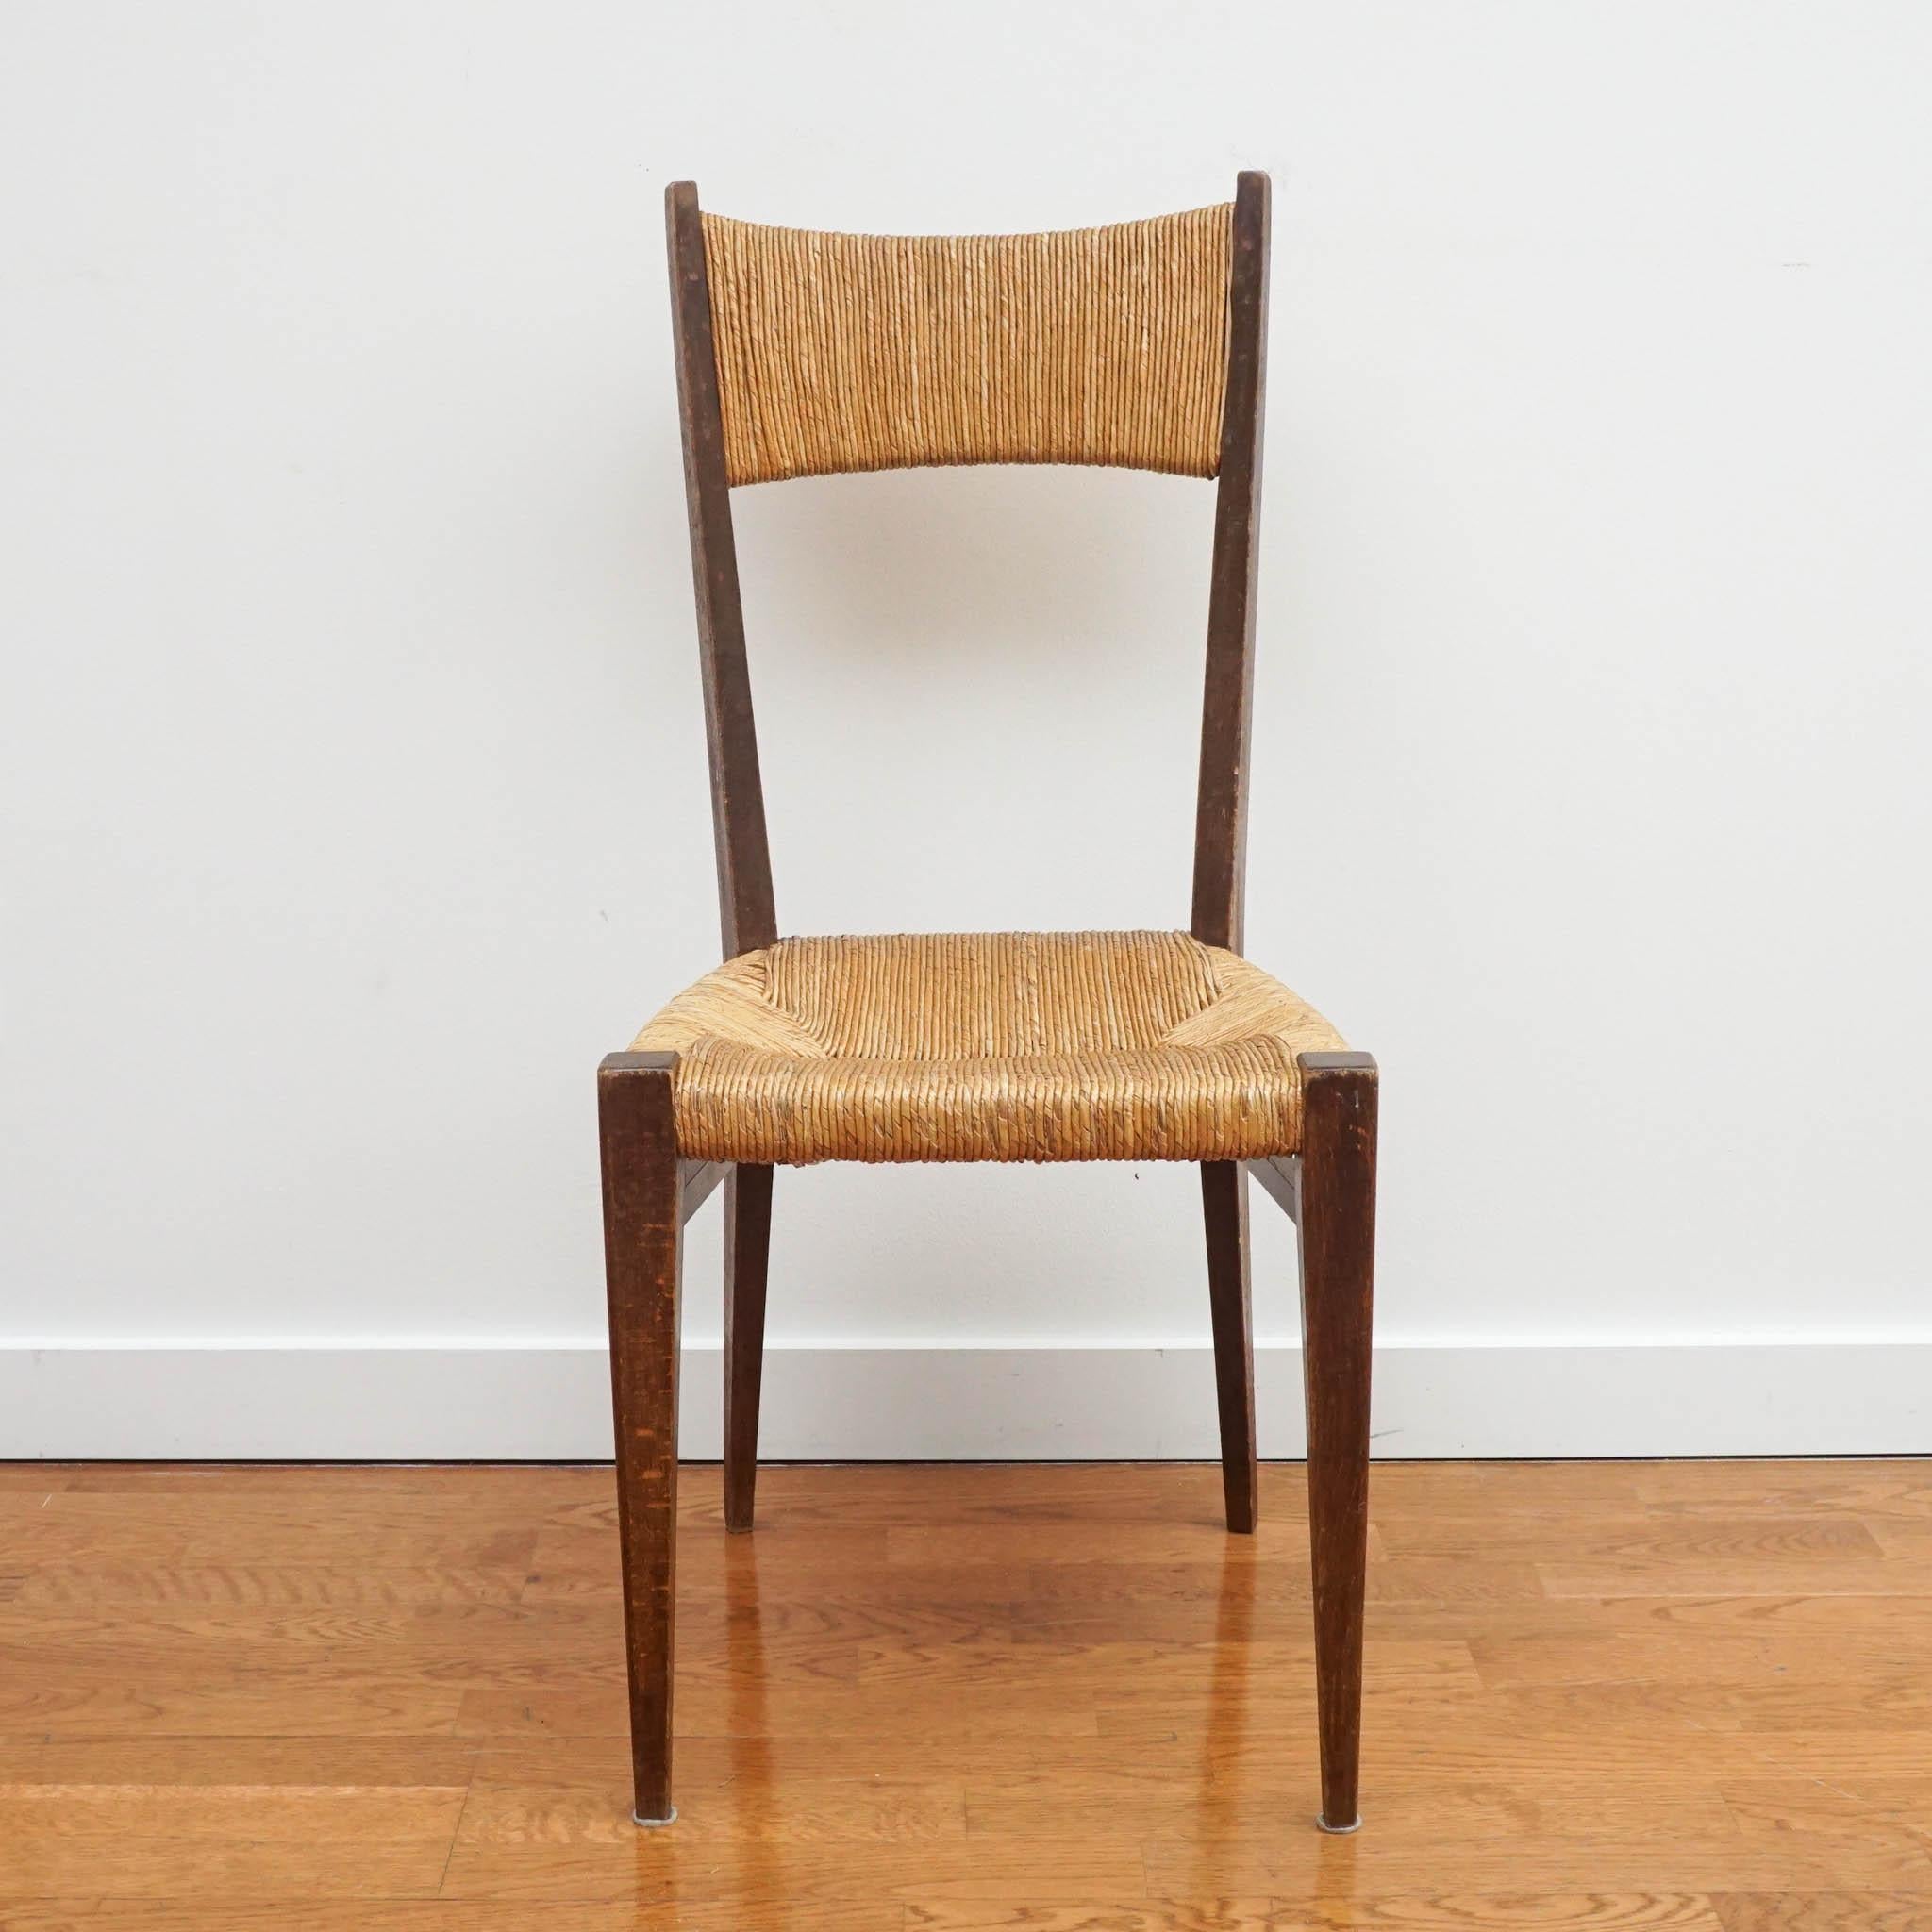 Elegant and slender French dining chairs, from the 1970's. Unique straw back and seat, and solid oak frame make these chairs even more special.
Sold separately.